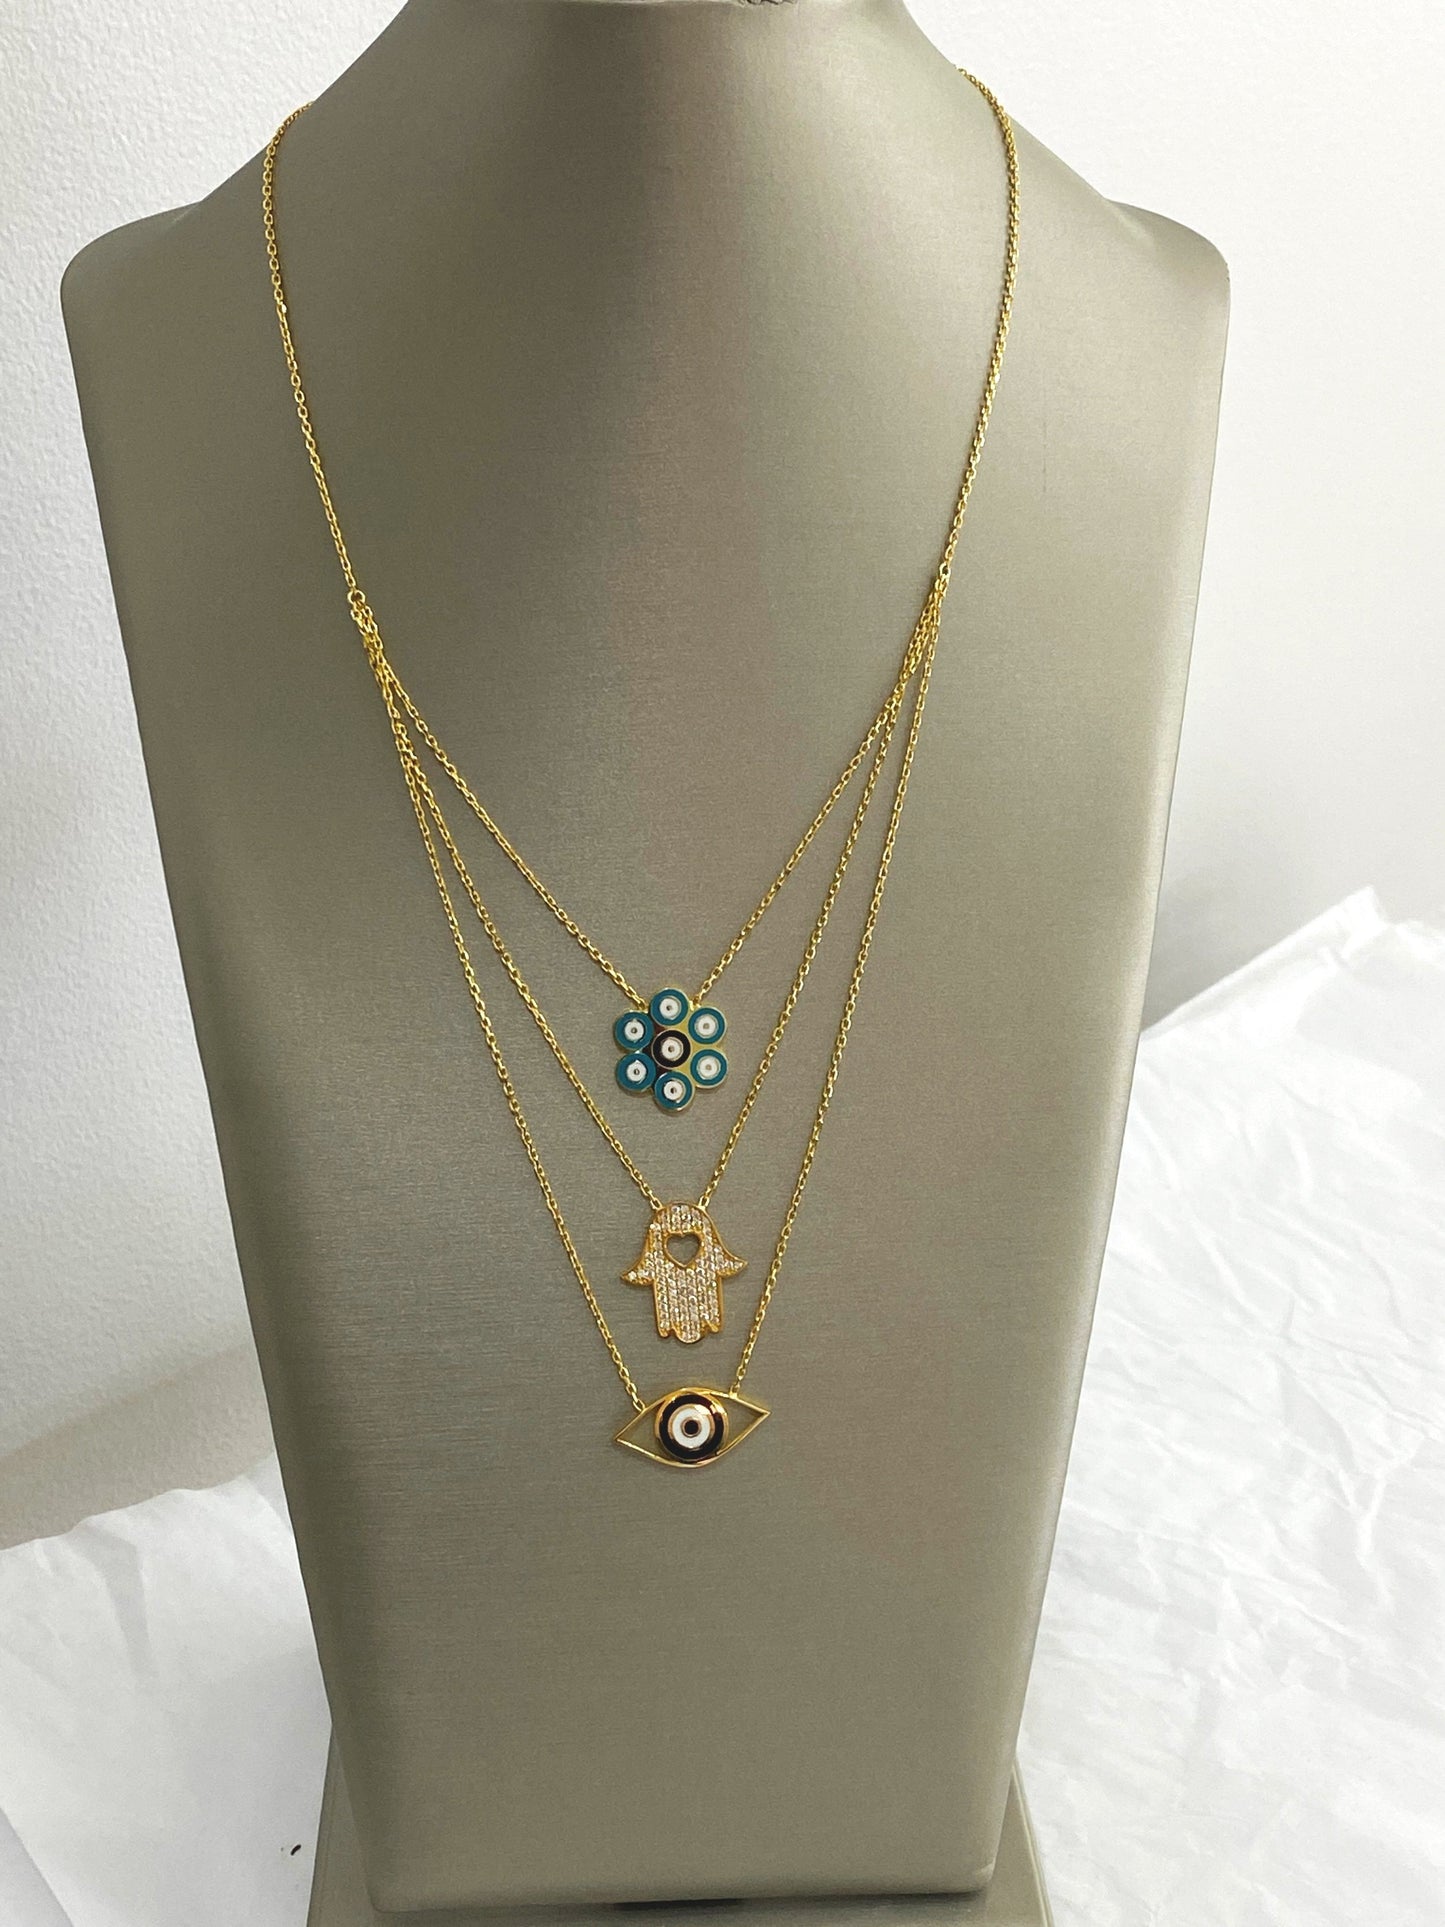 21k Gold Layered Necklace